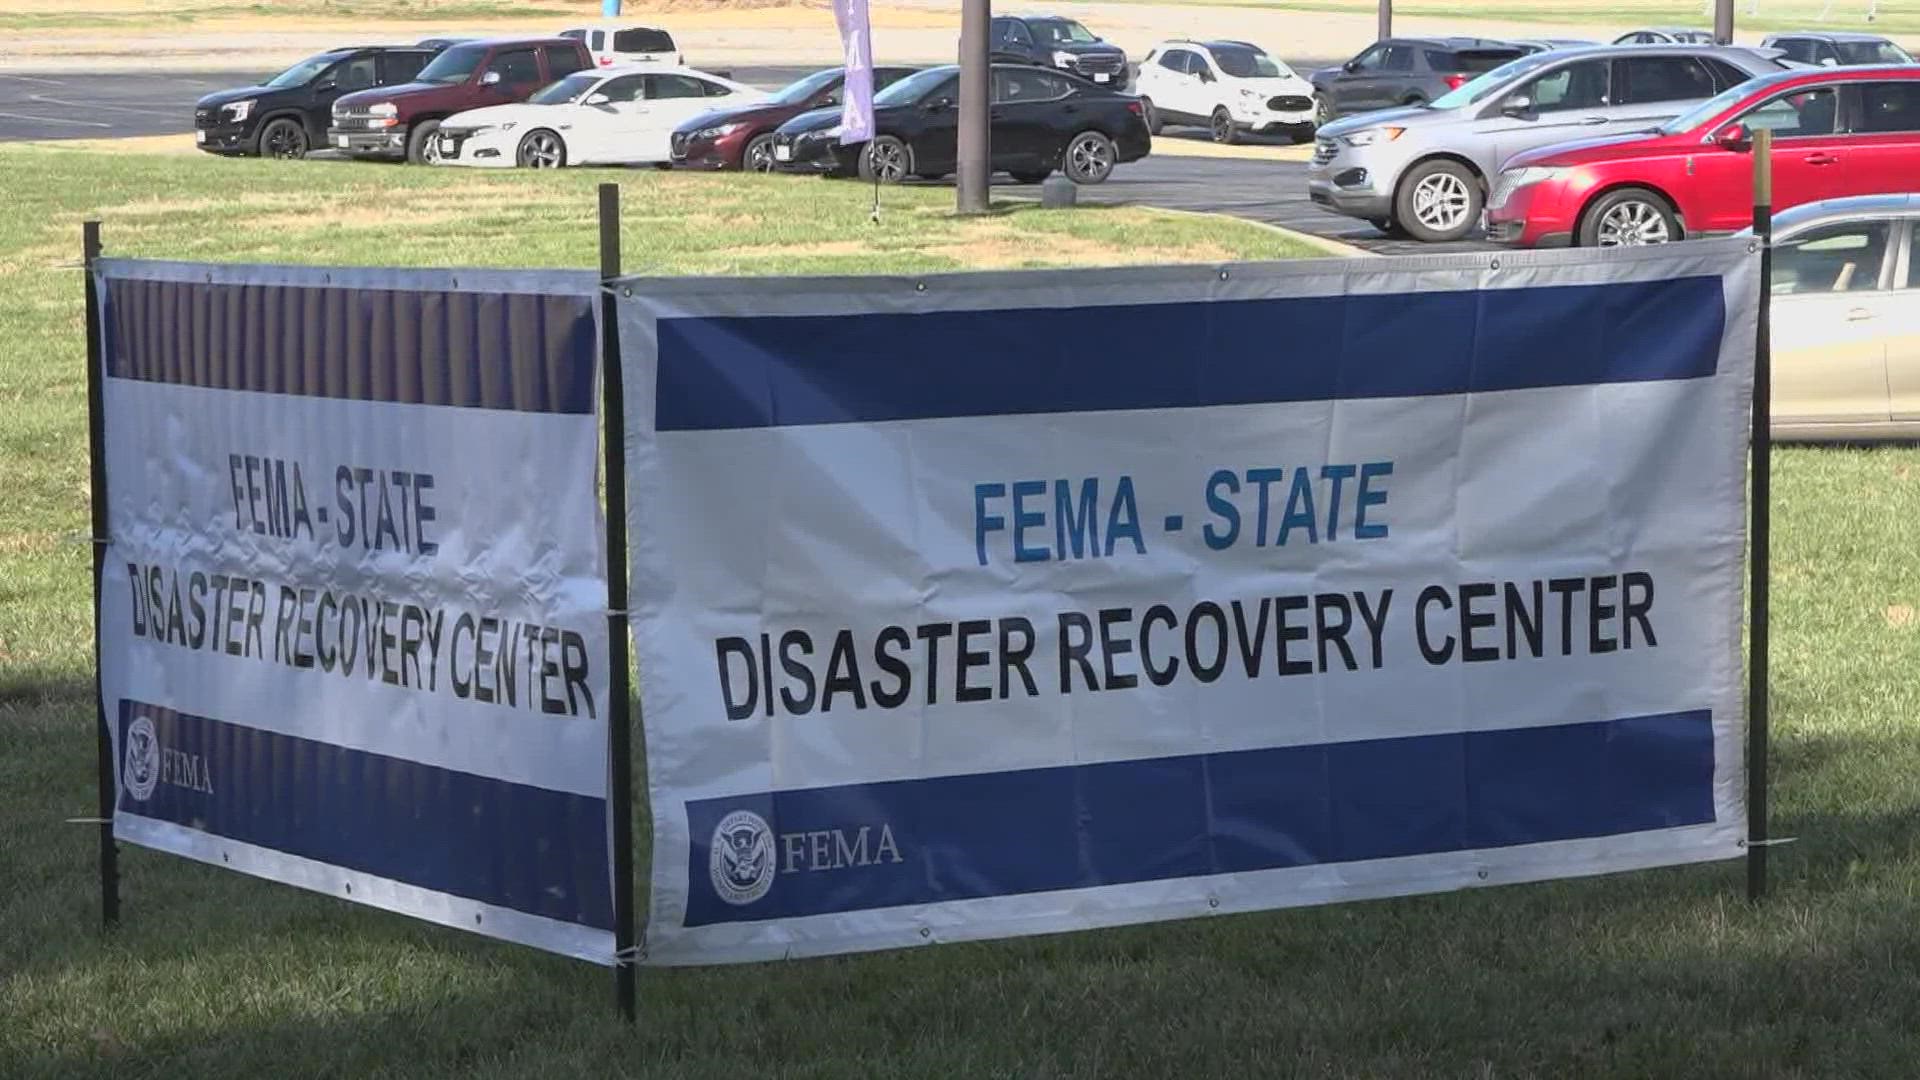 Missouri residents who dealt with flood damage in July have one more week to apply for assistance from the federal government.